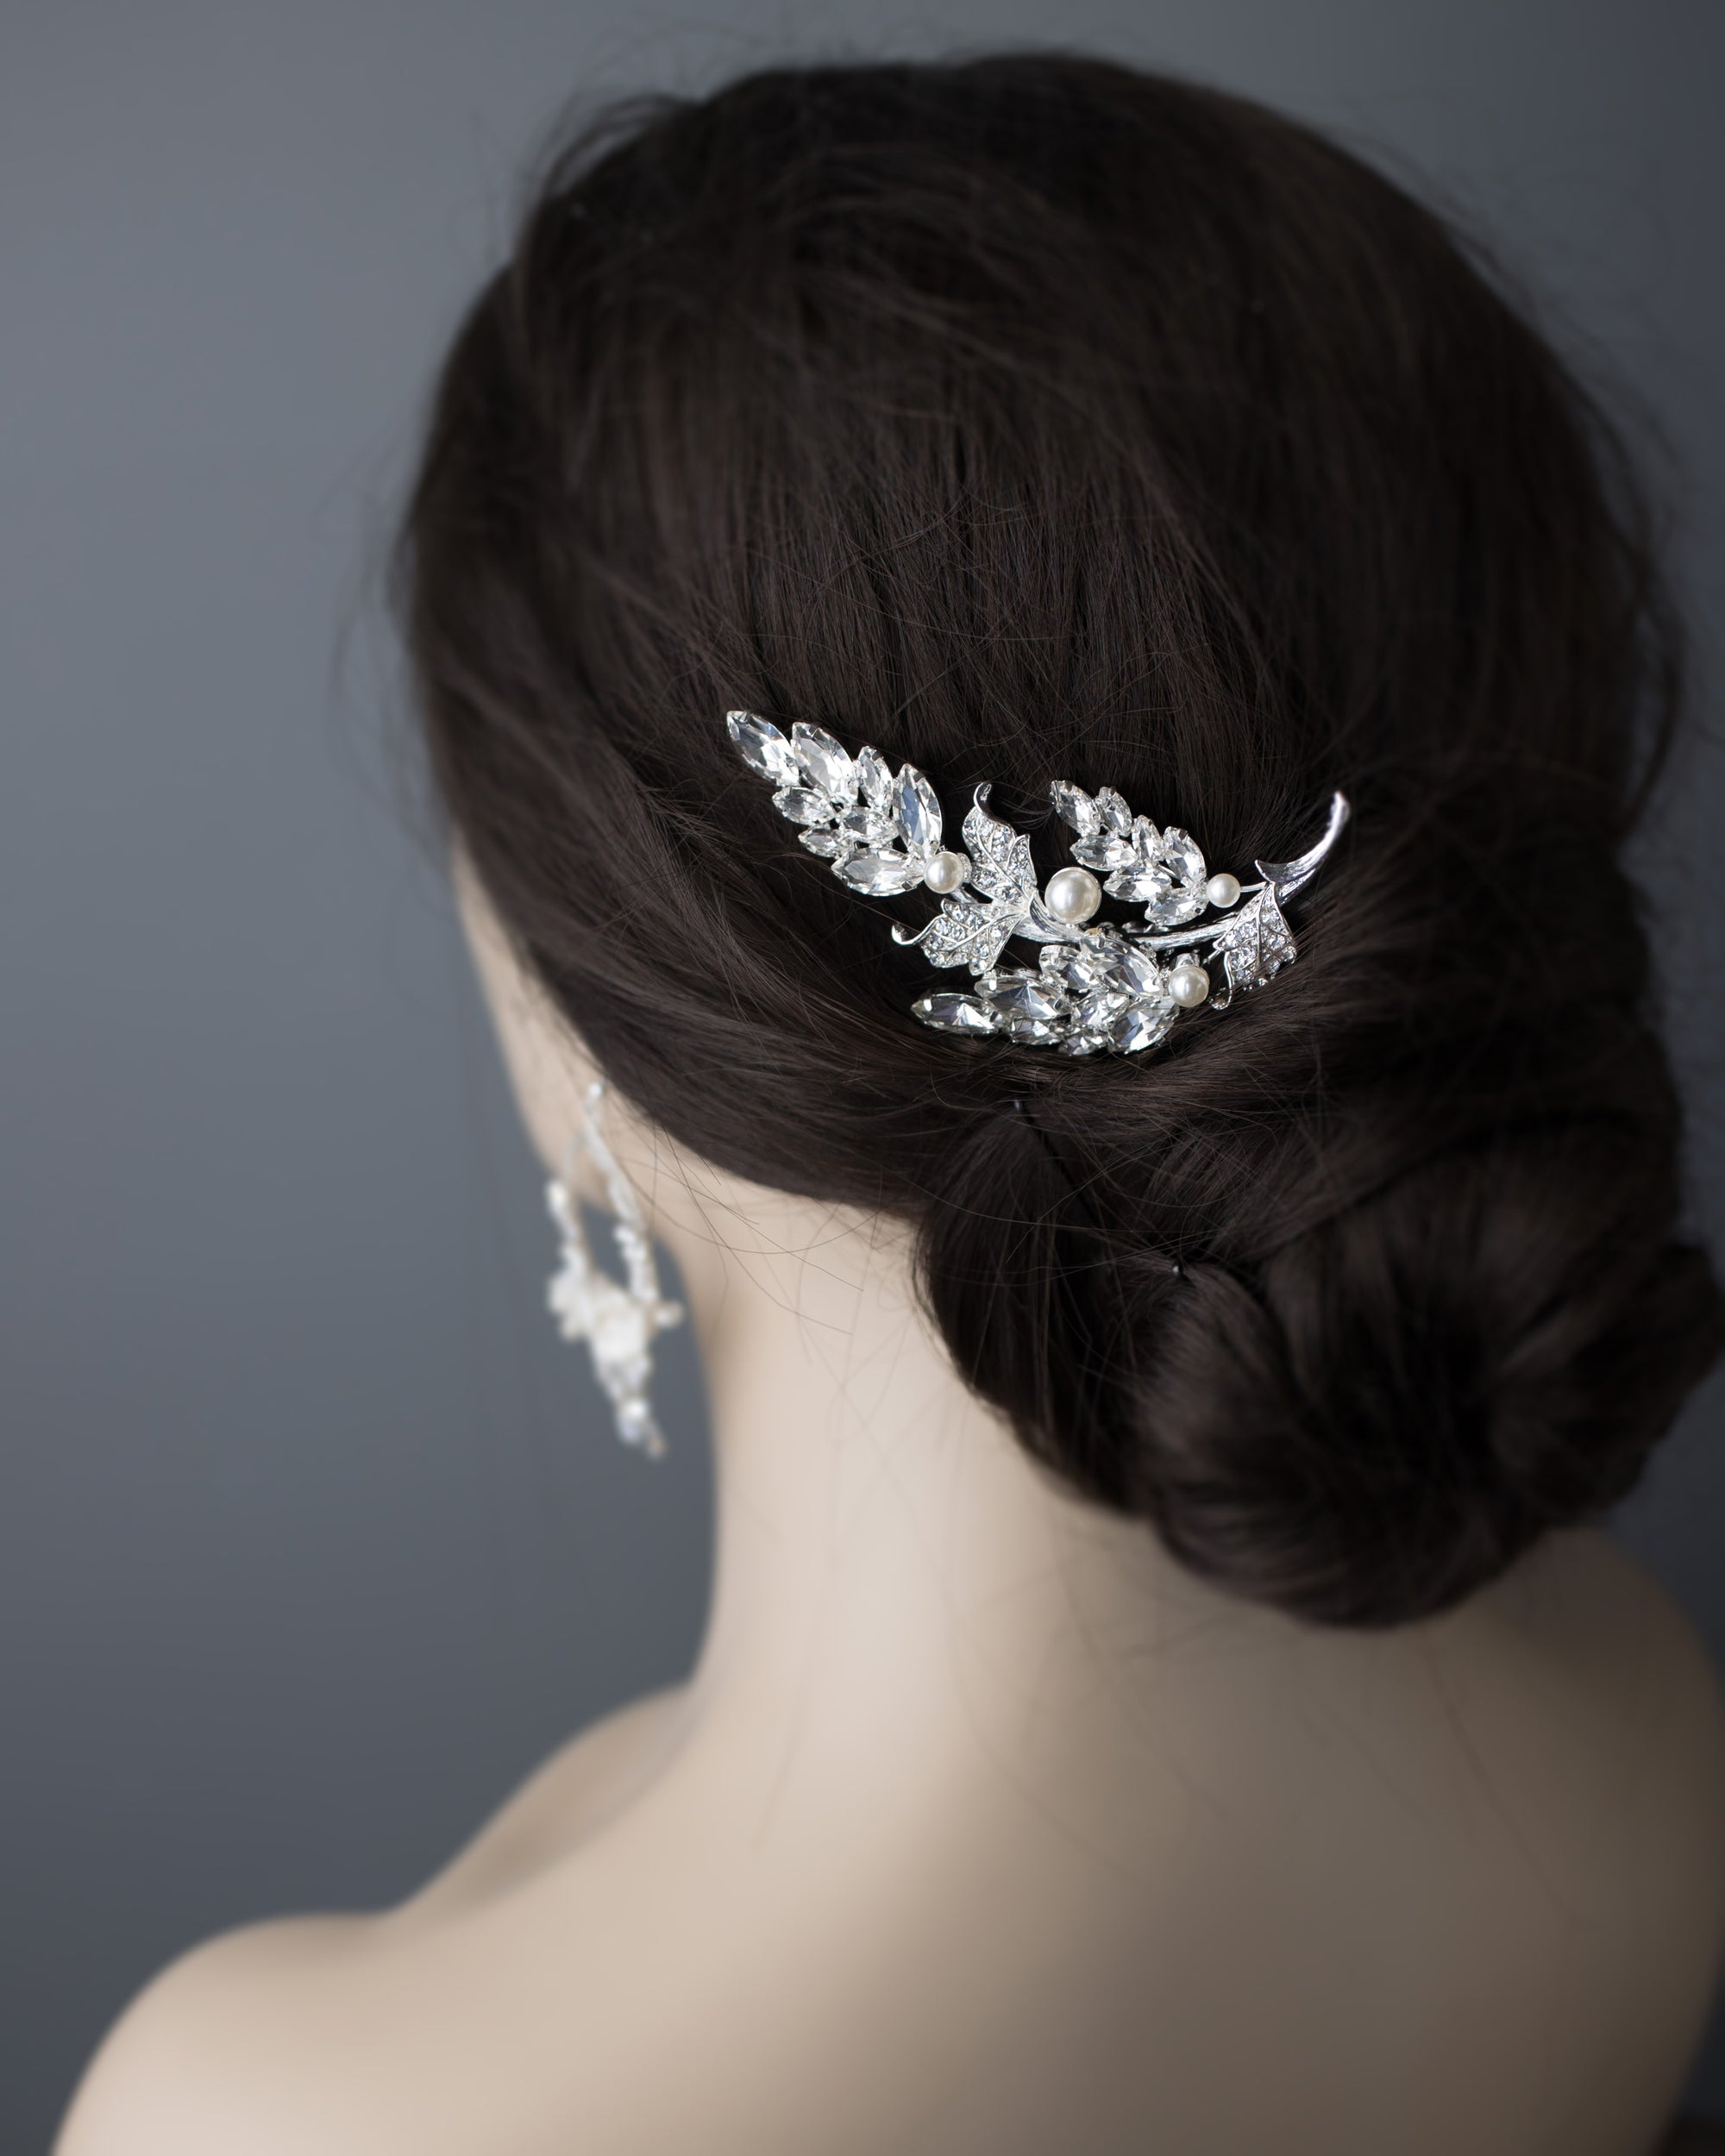 Hair Comb with Crystal Leaves and Pearls - Cassandra Lynne